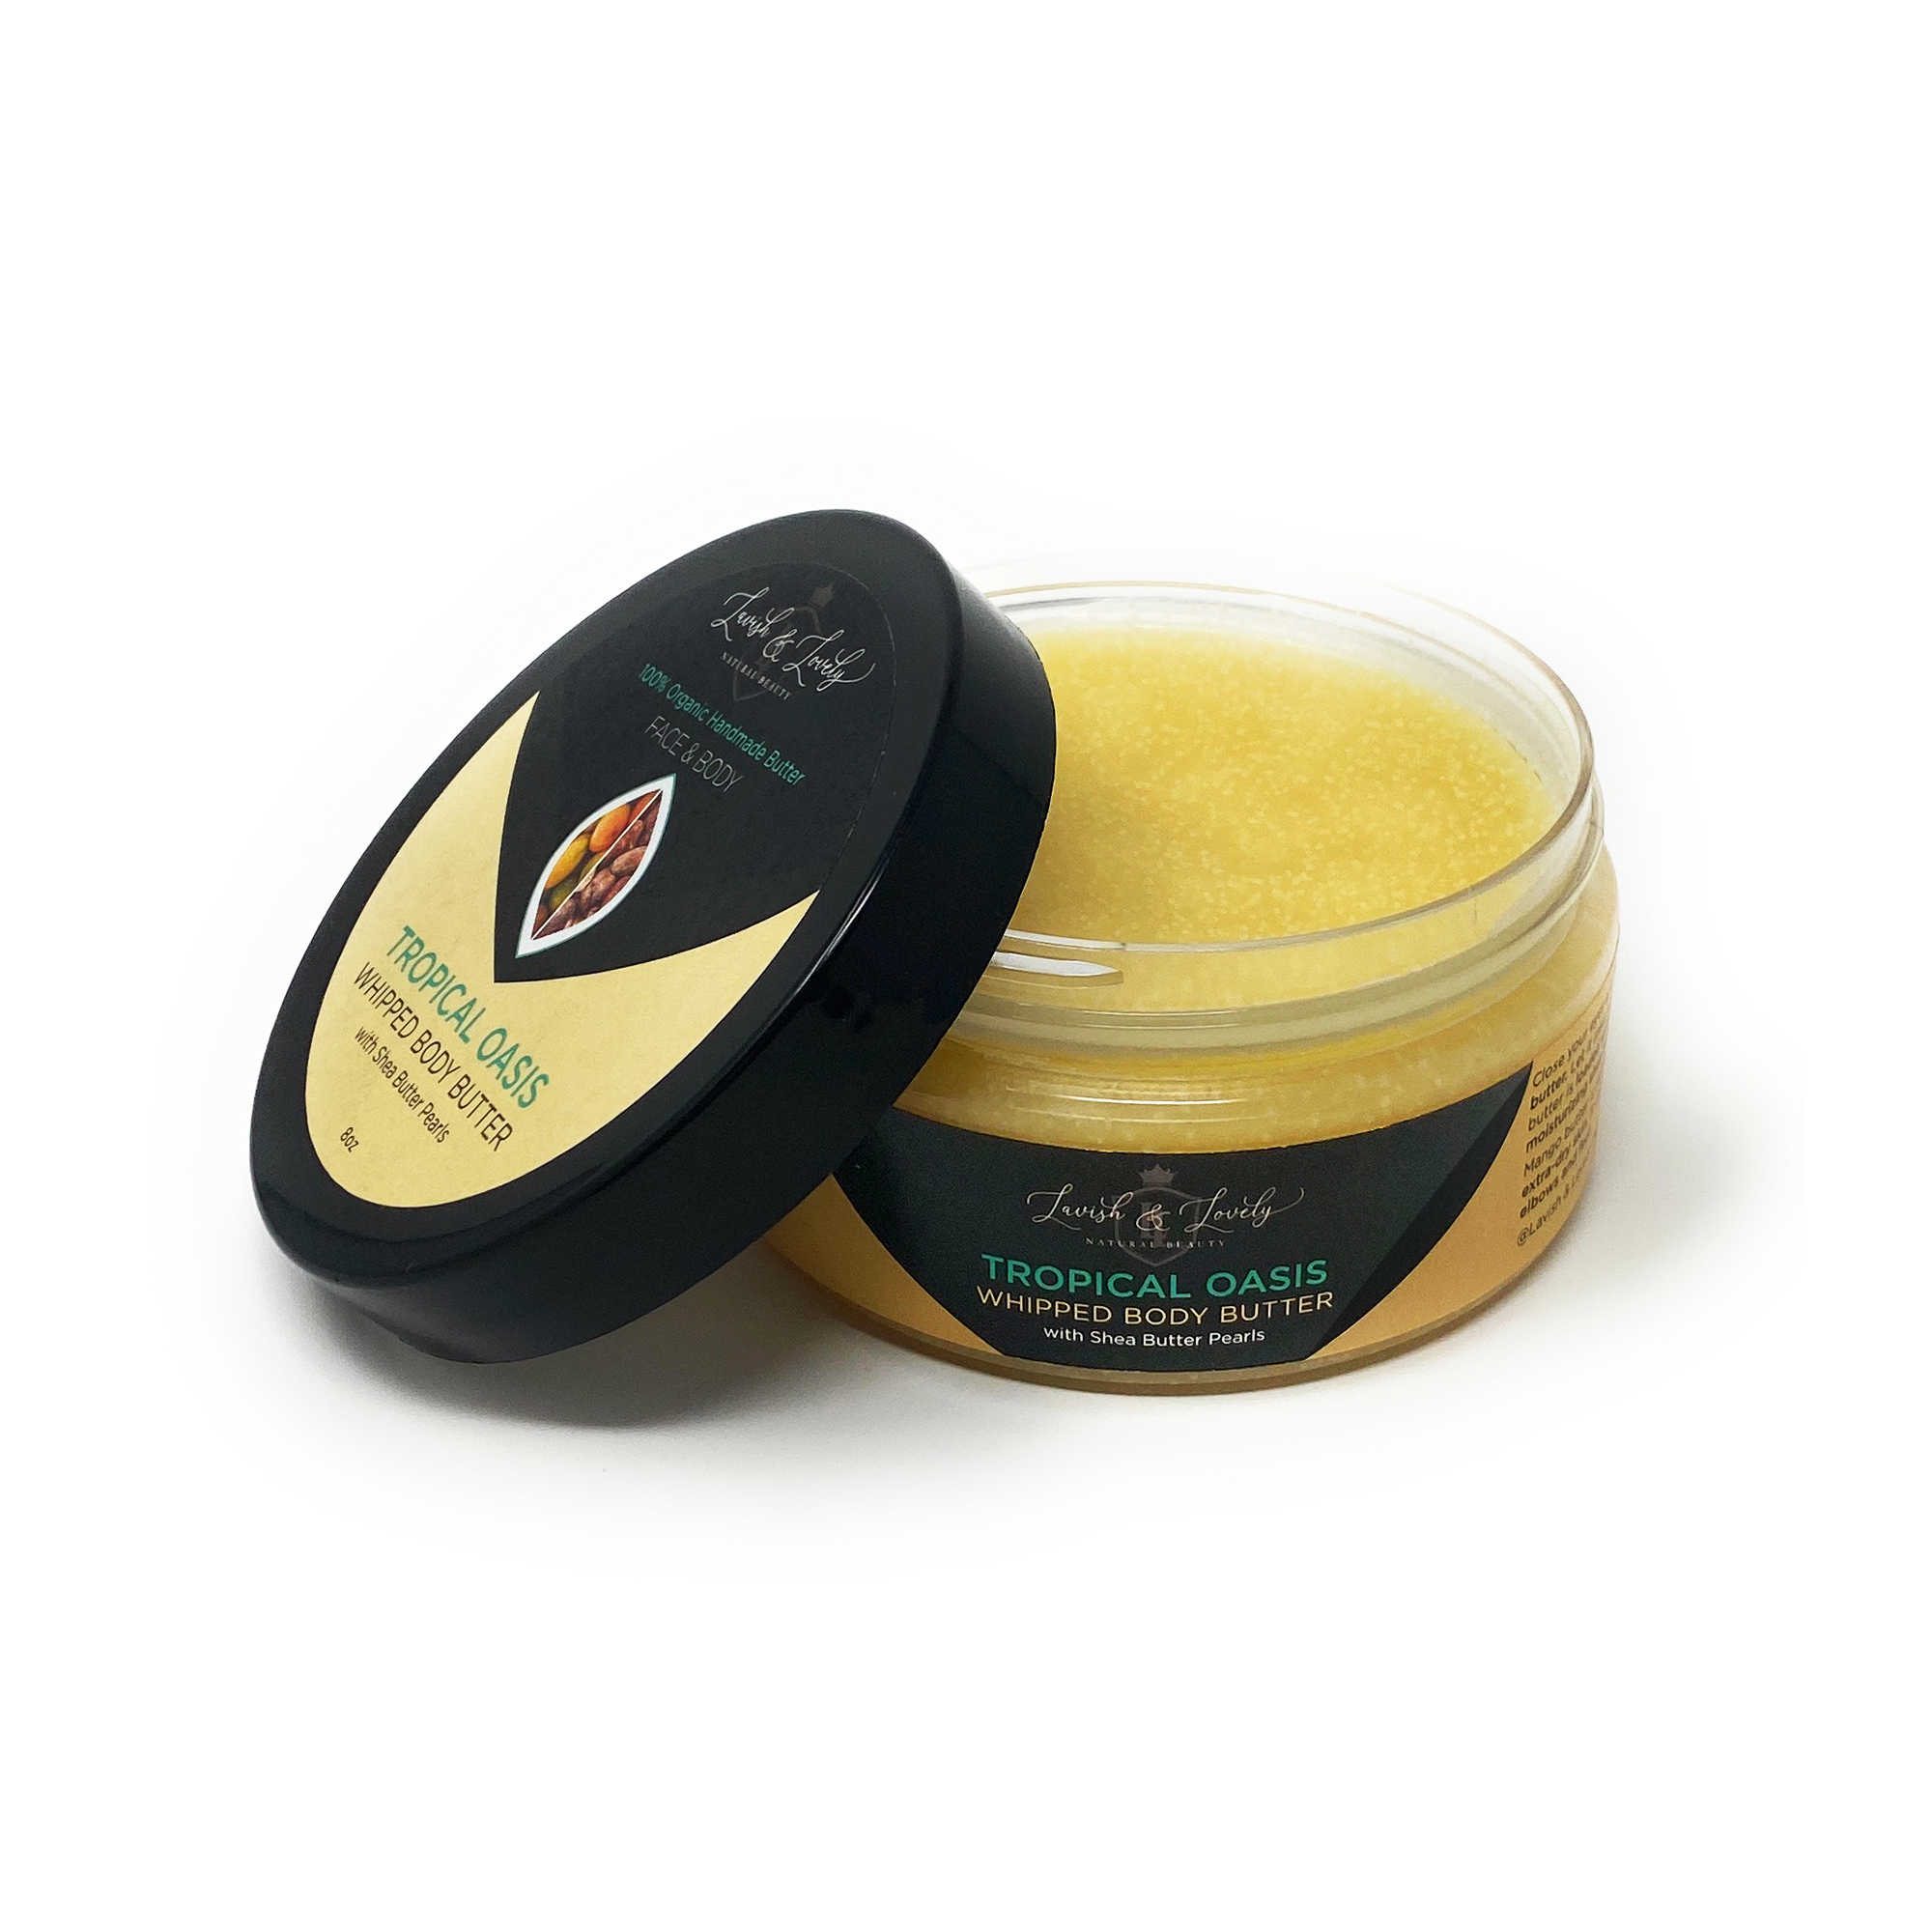 Lavish & Lovely - Tropical Oasis Scented Whipped Body Butter with Shea Pearls (8oz)